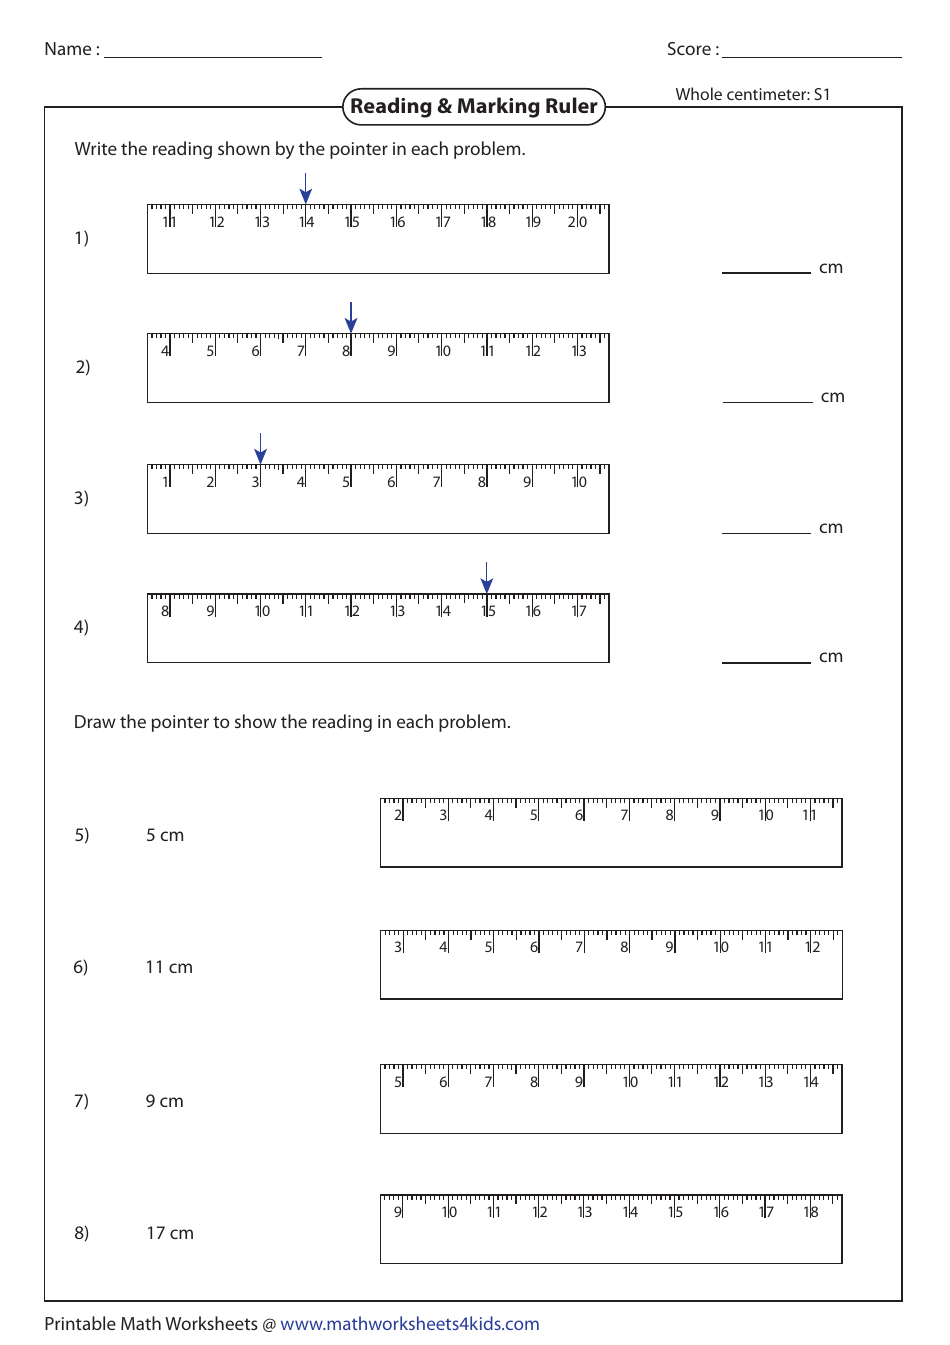 Reading and Marking Ruler Worksheet With Answer Key preview image